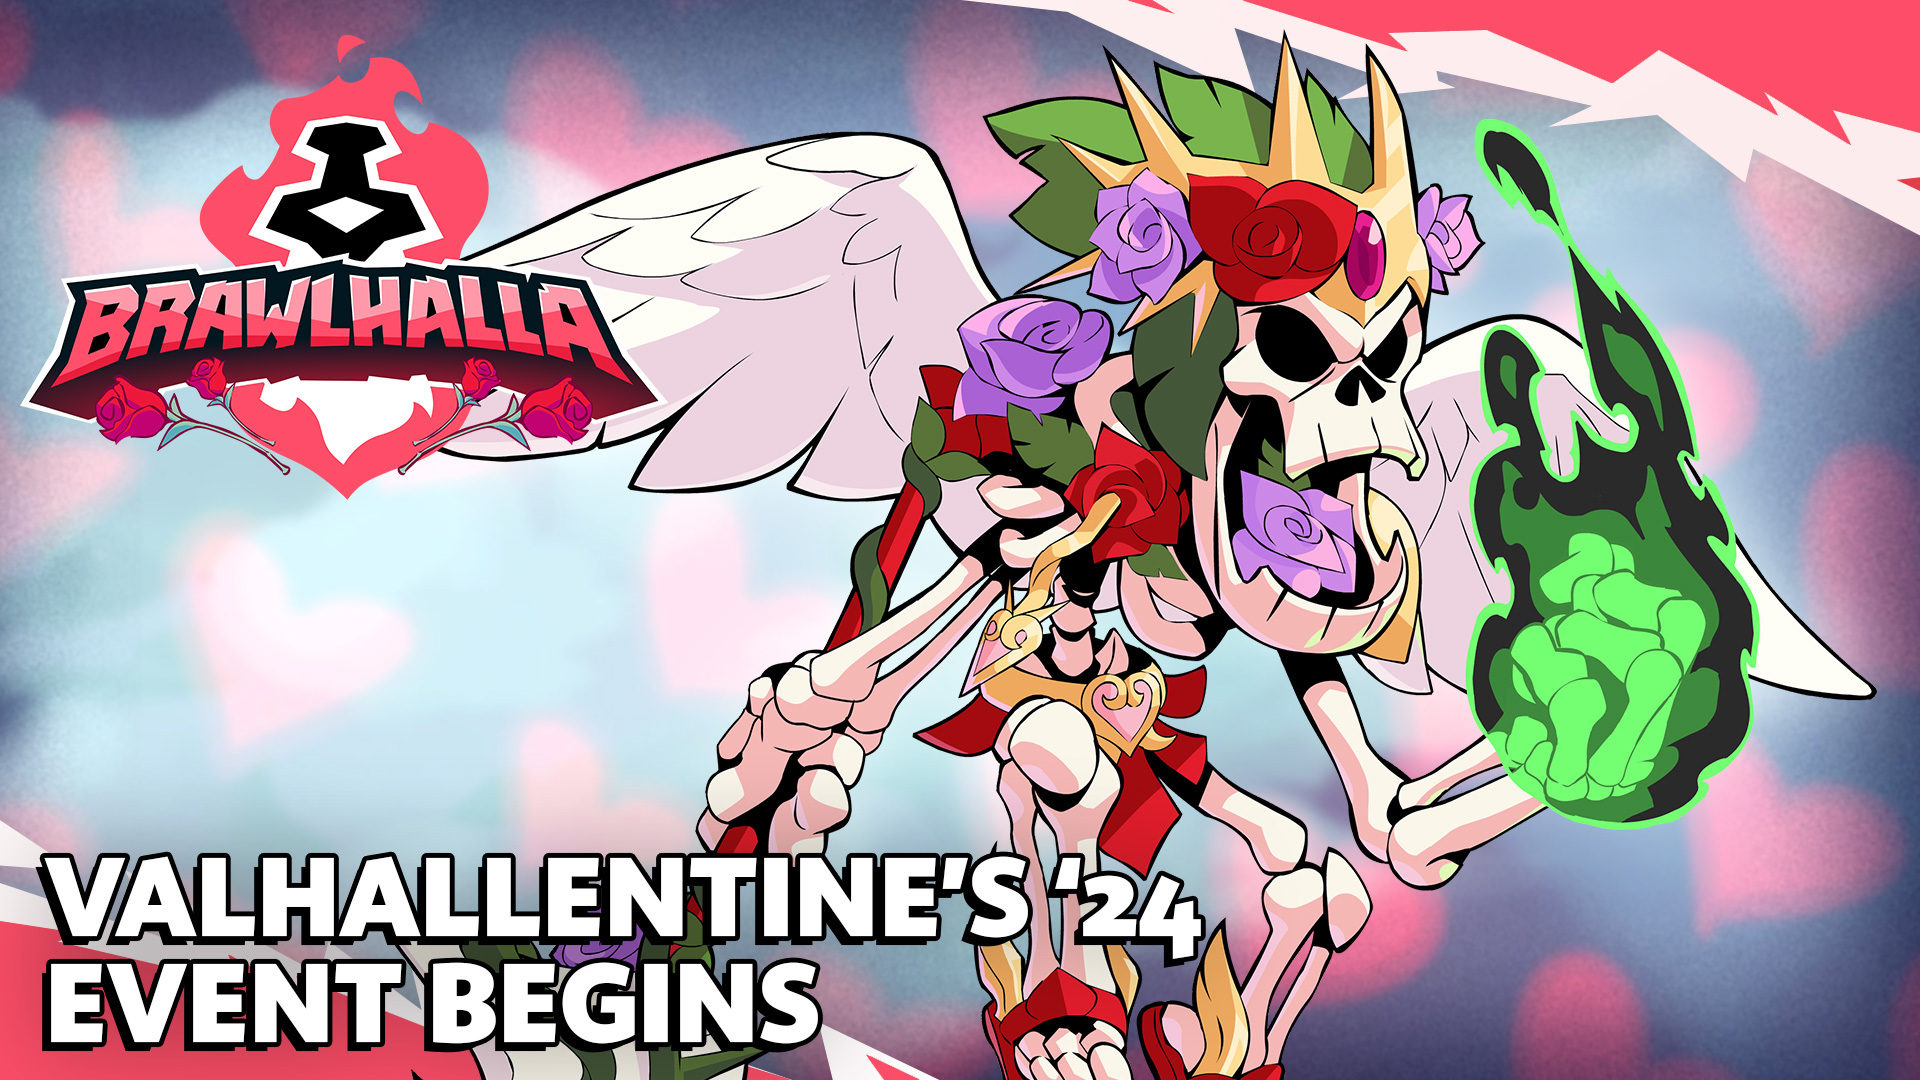 BMG LOVES YOU! Valhallentine&#8217;s ‘24 is here!